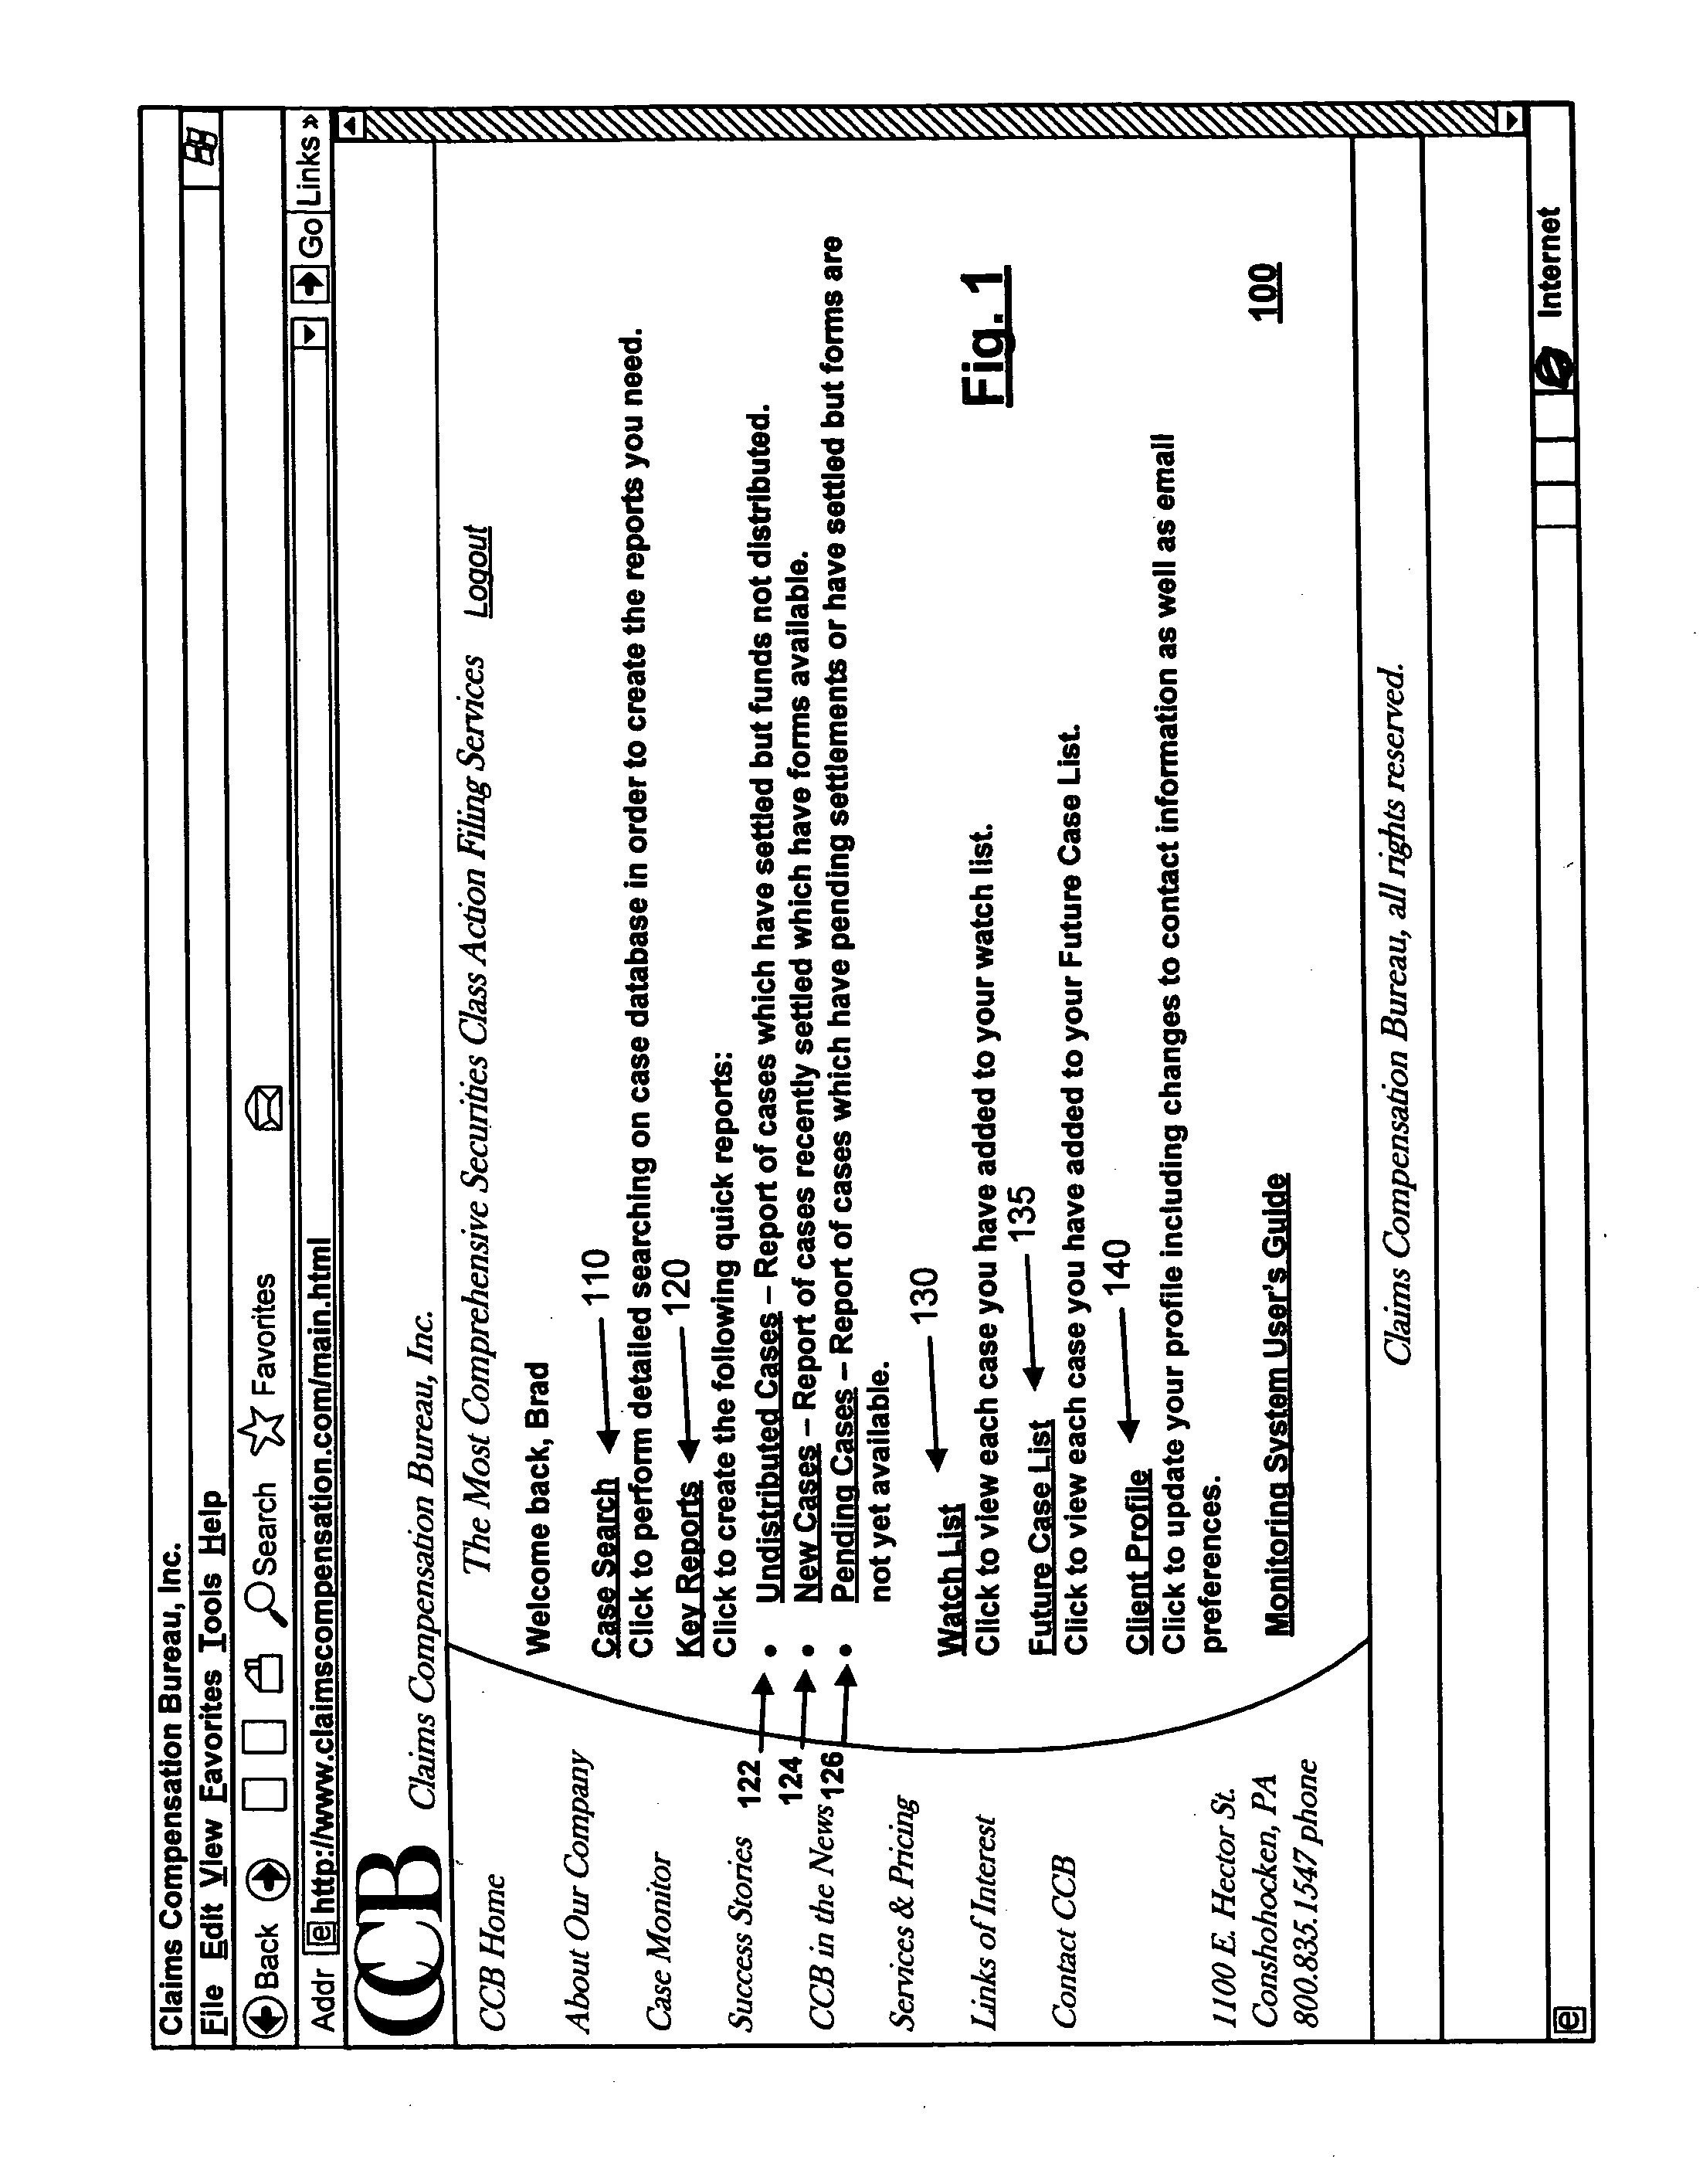 Method and apparatus for facilitating shareholder claims compensation